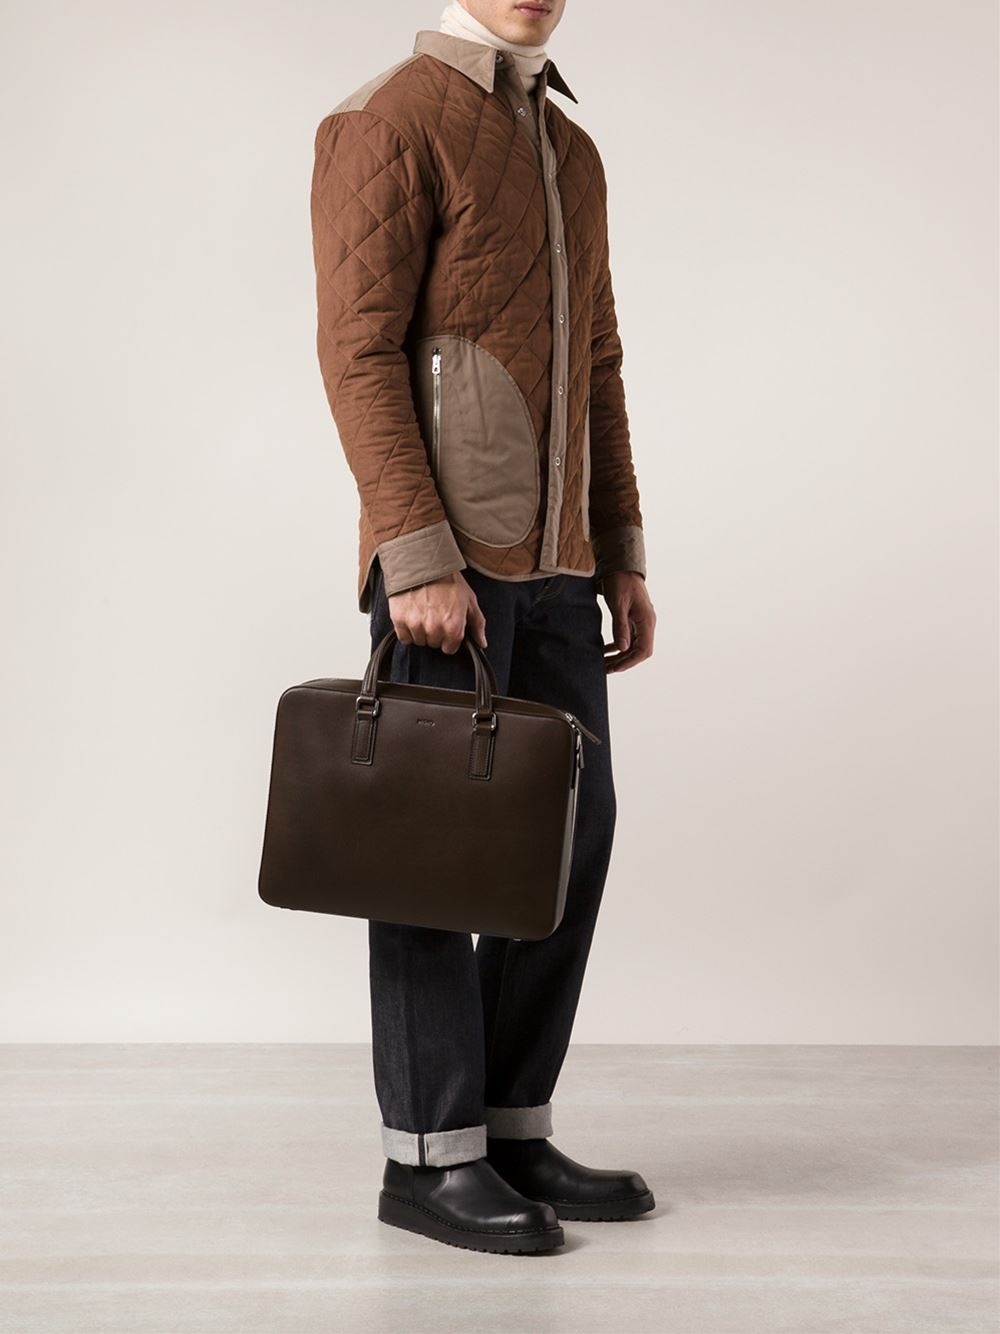 Mismo Morris Briefcase in Brown for Men - Lyst